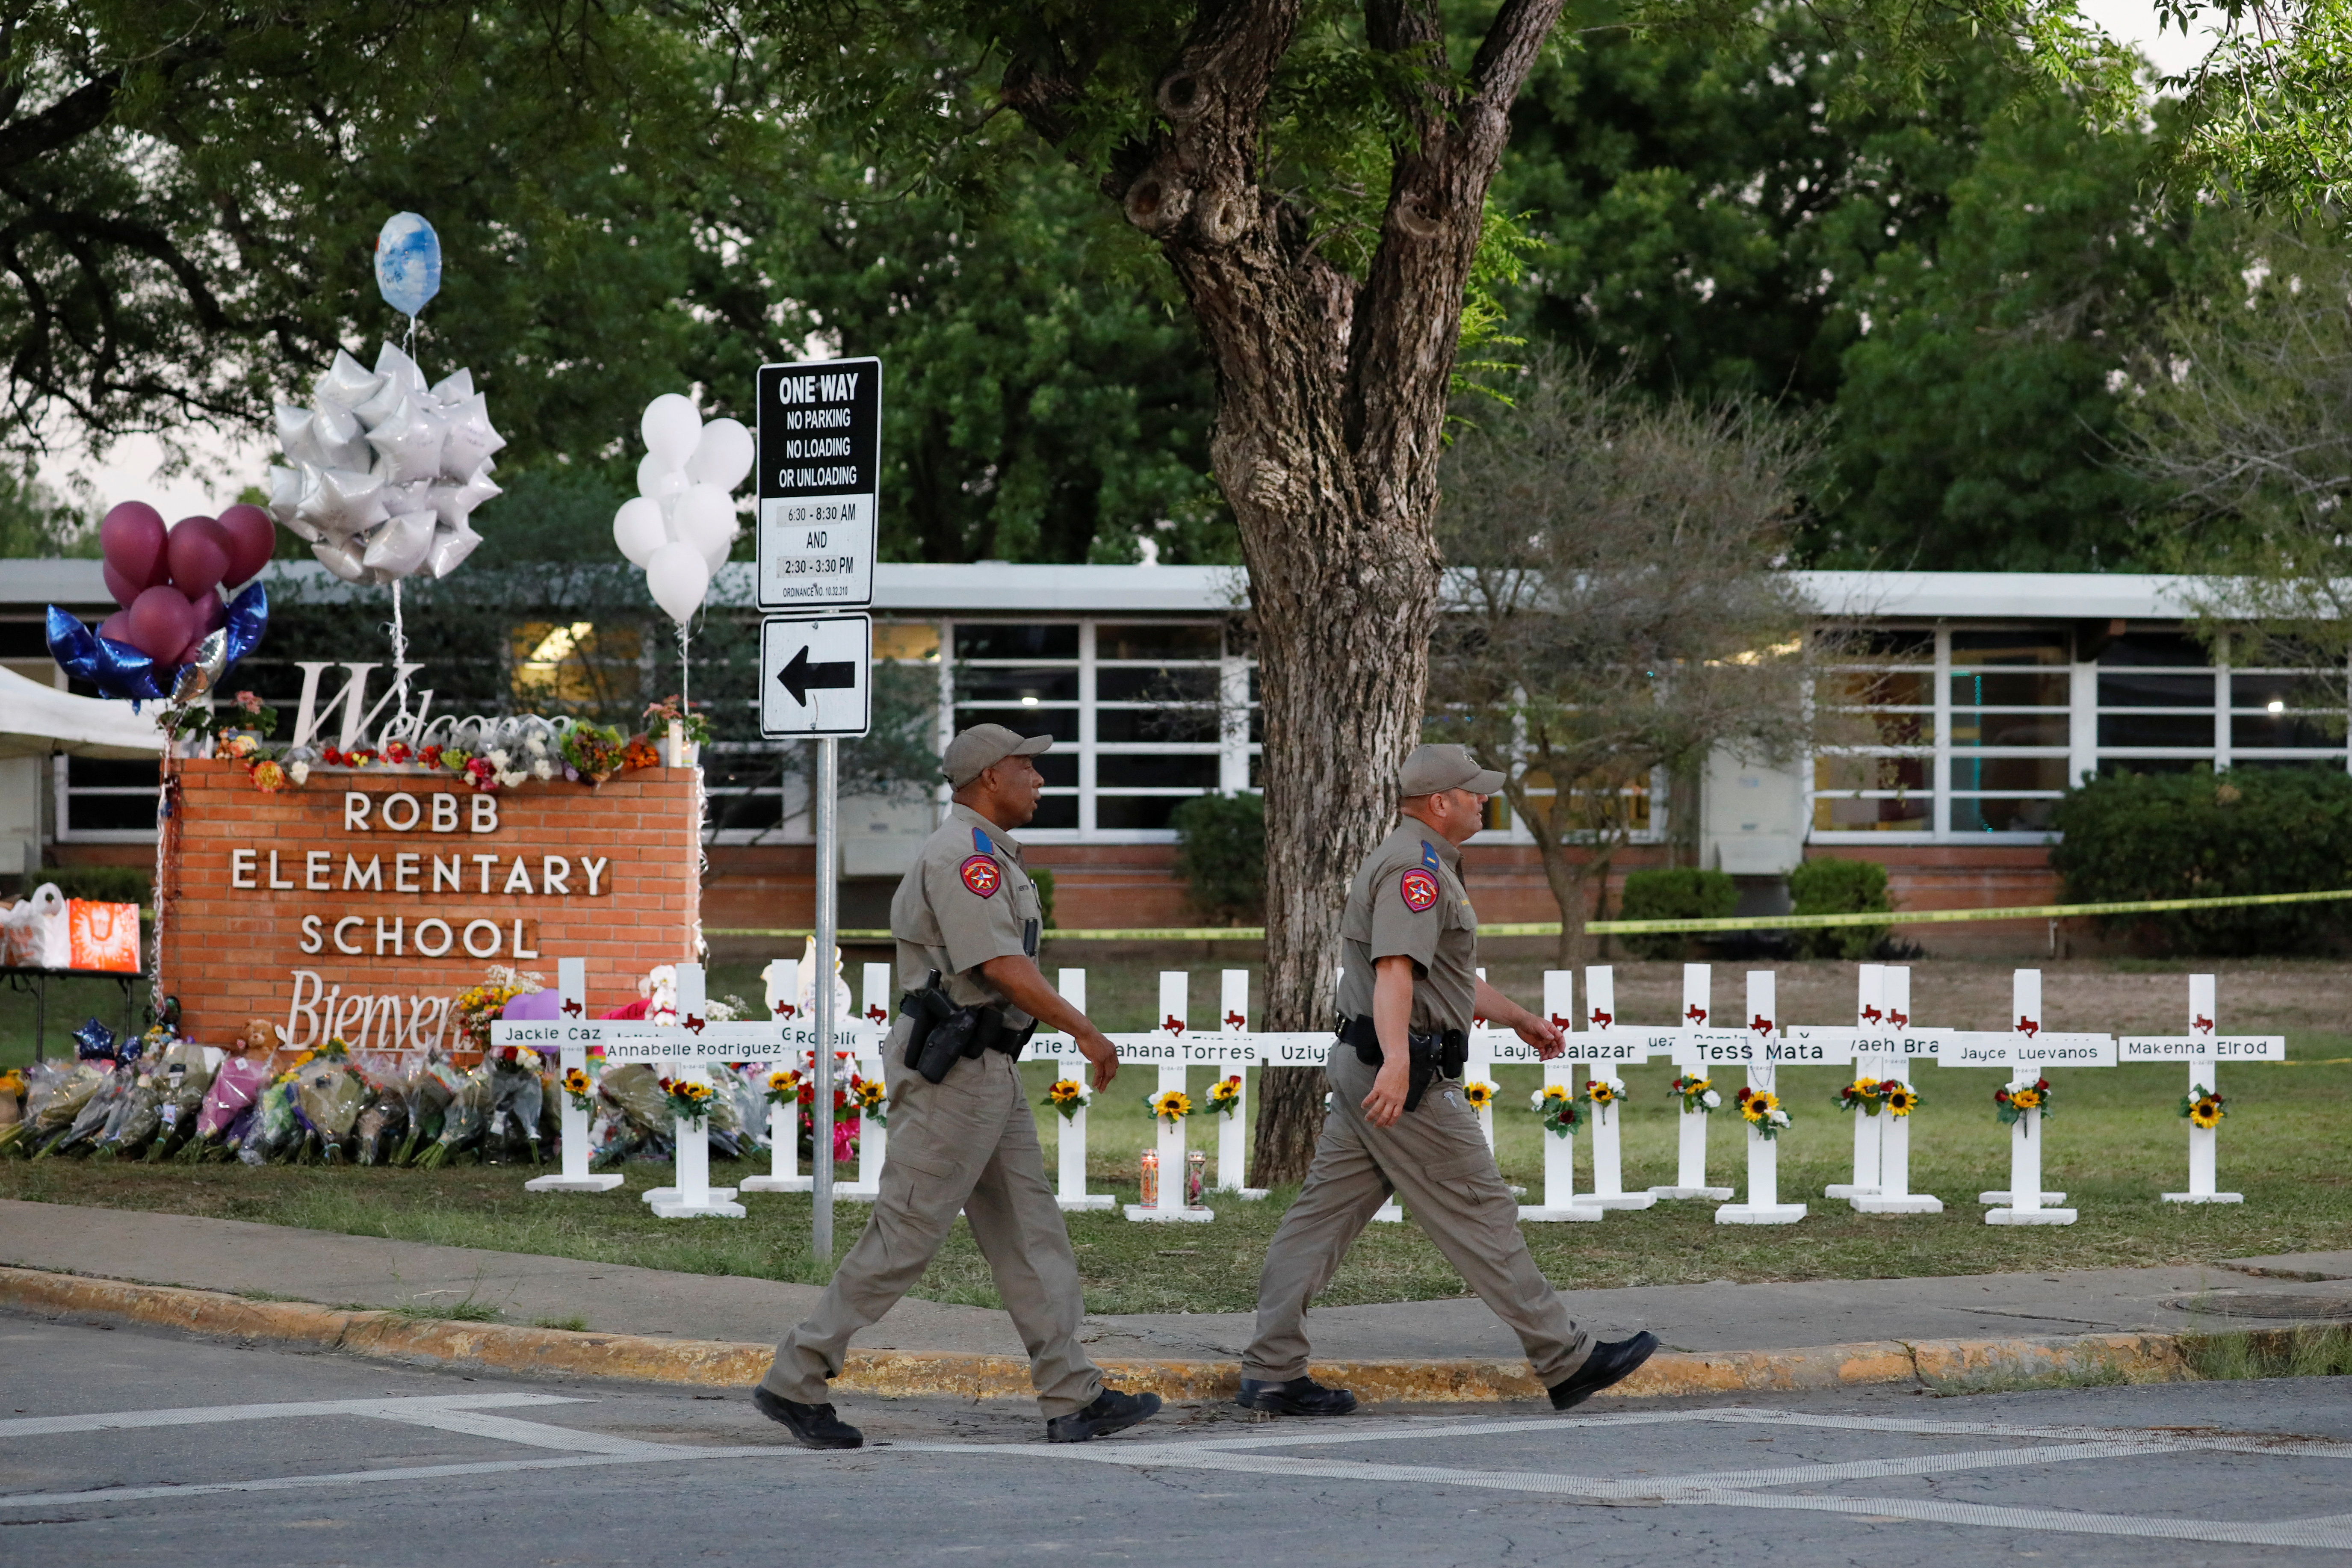 Texas Department of Public Safety officers walk past a memorial, after mass shooting at Robb Elementary School in Uvalde